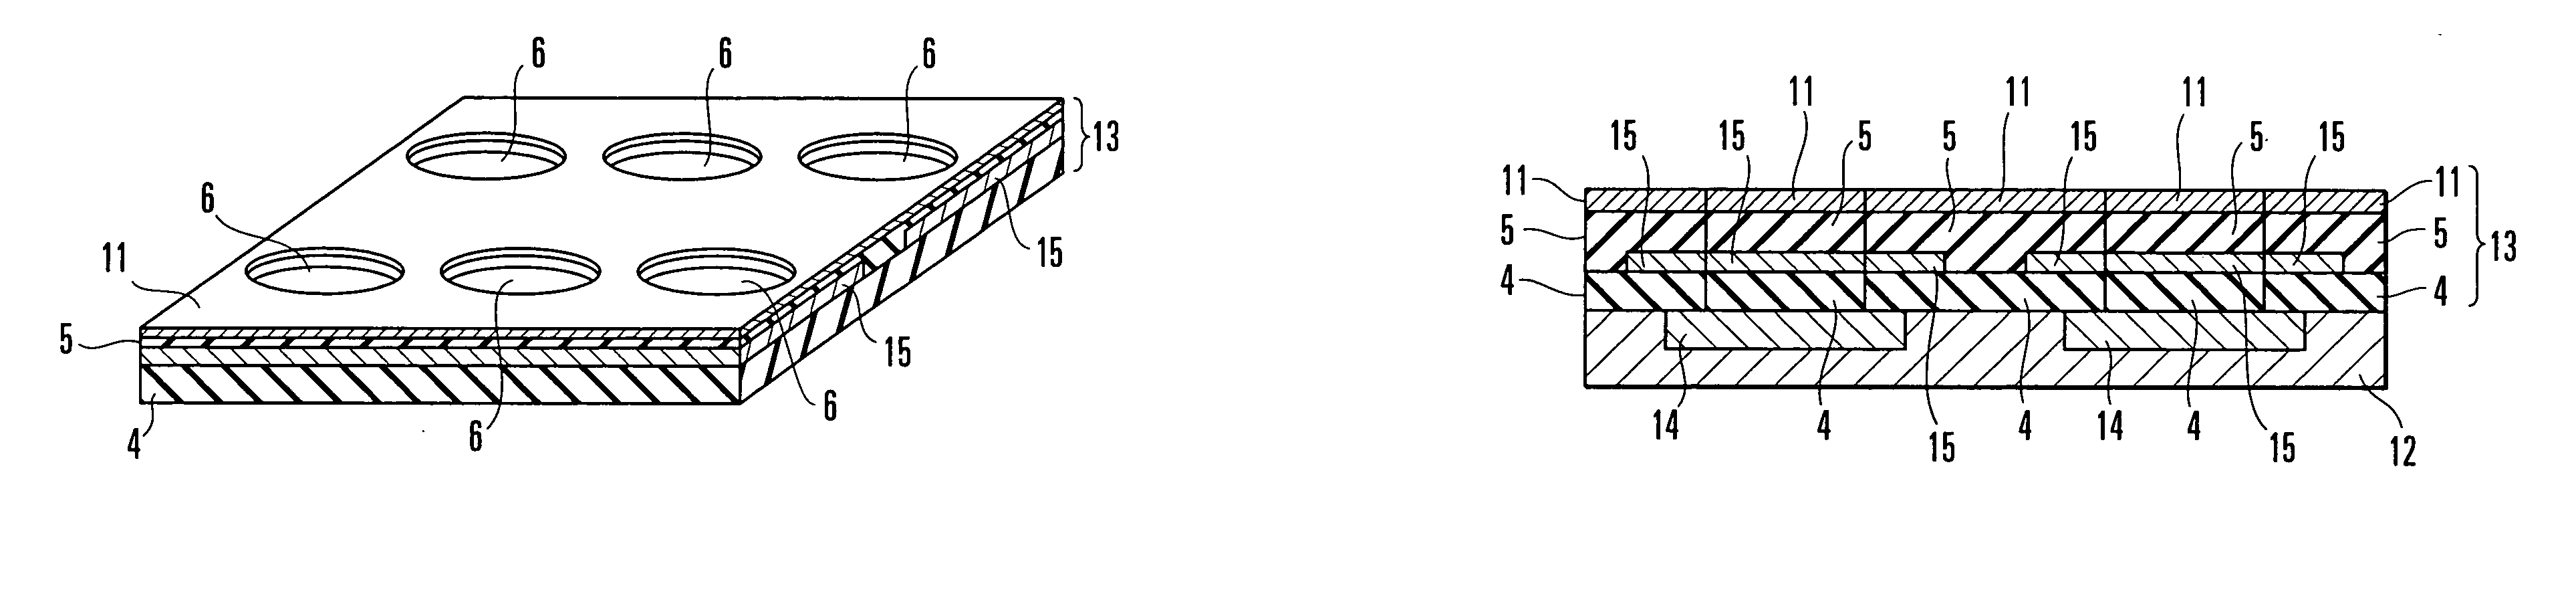 Flat panel display and method of manufacturing the same